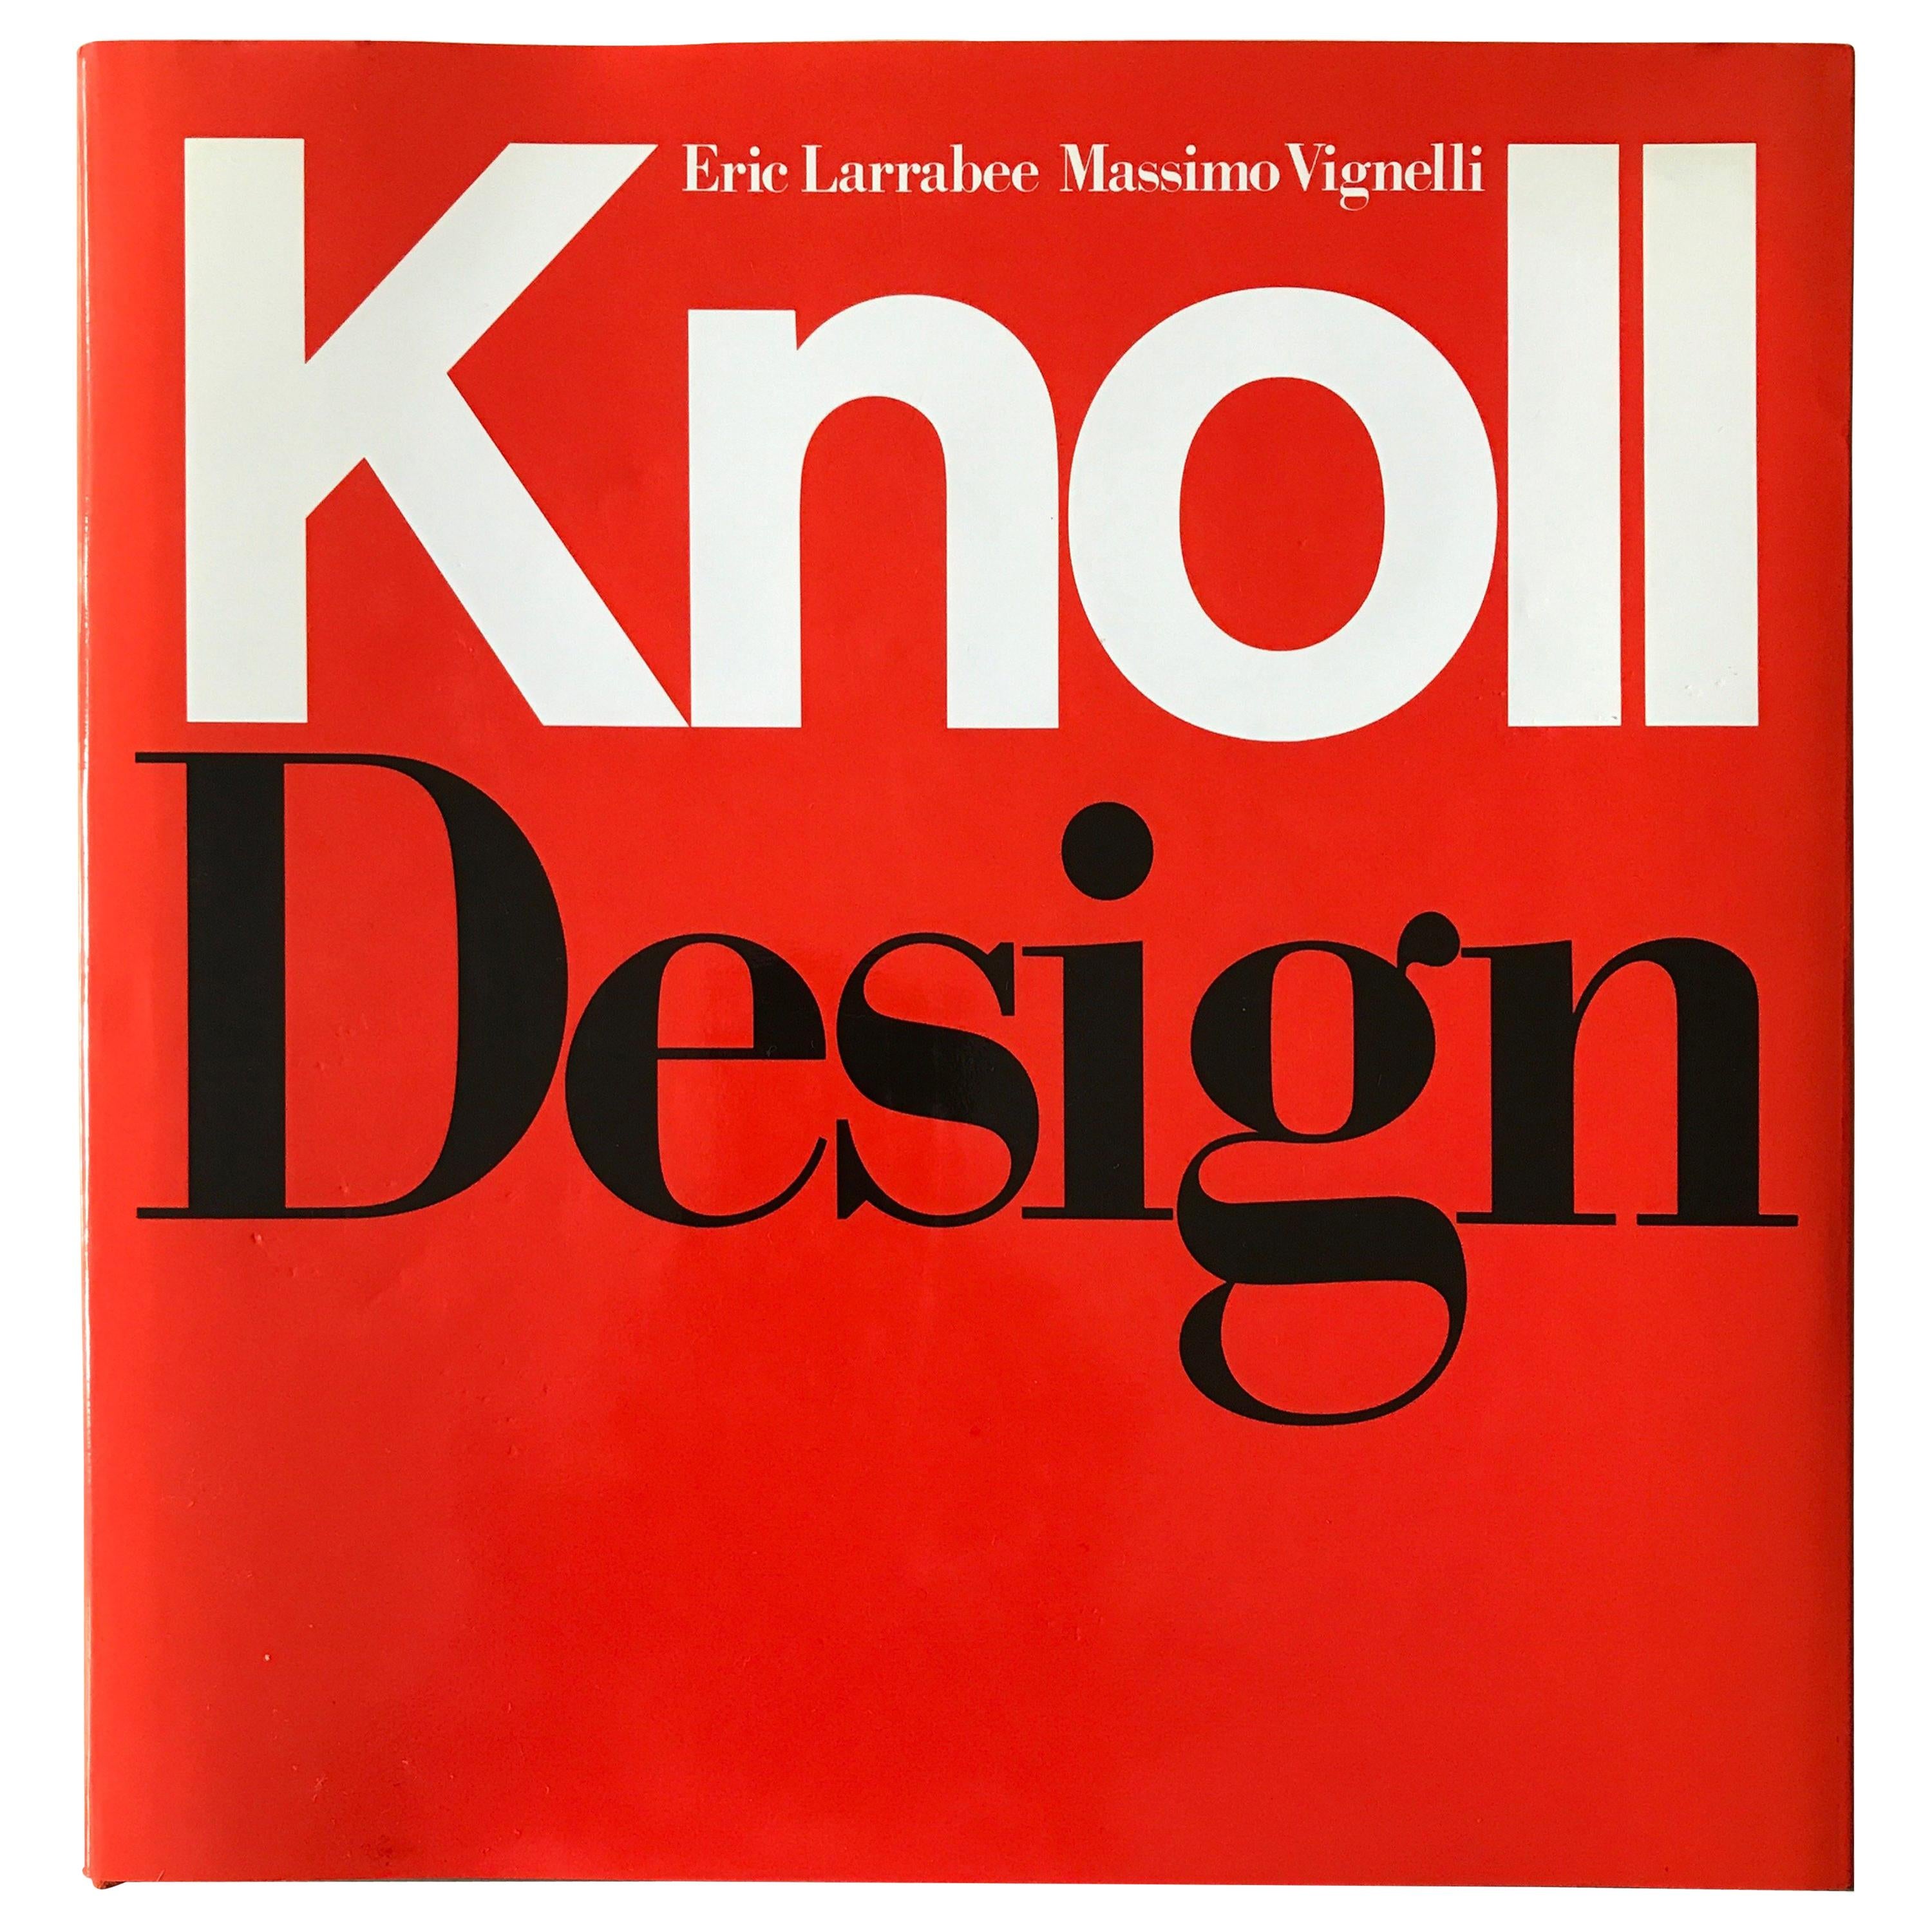 Knoll Design a Book by Eric Larrabee and Massimo Vignelli